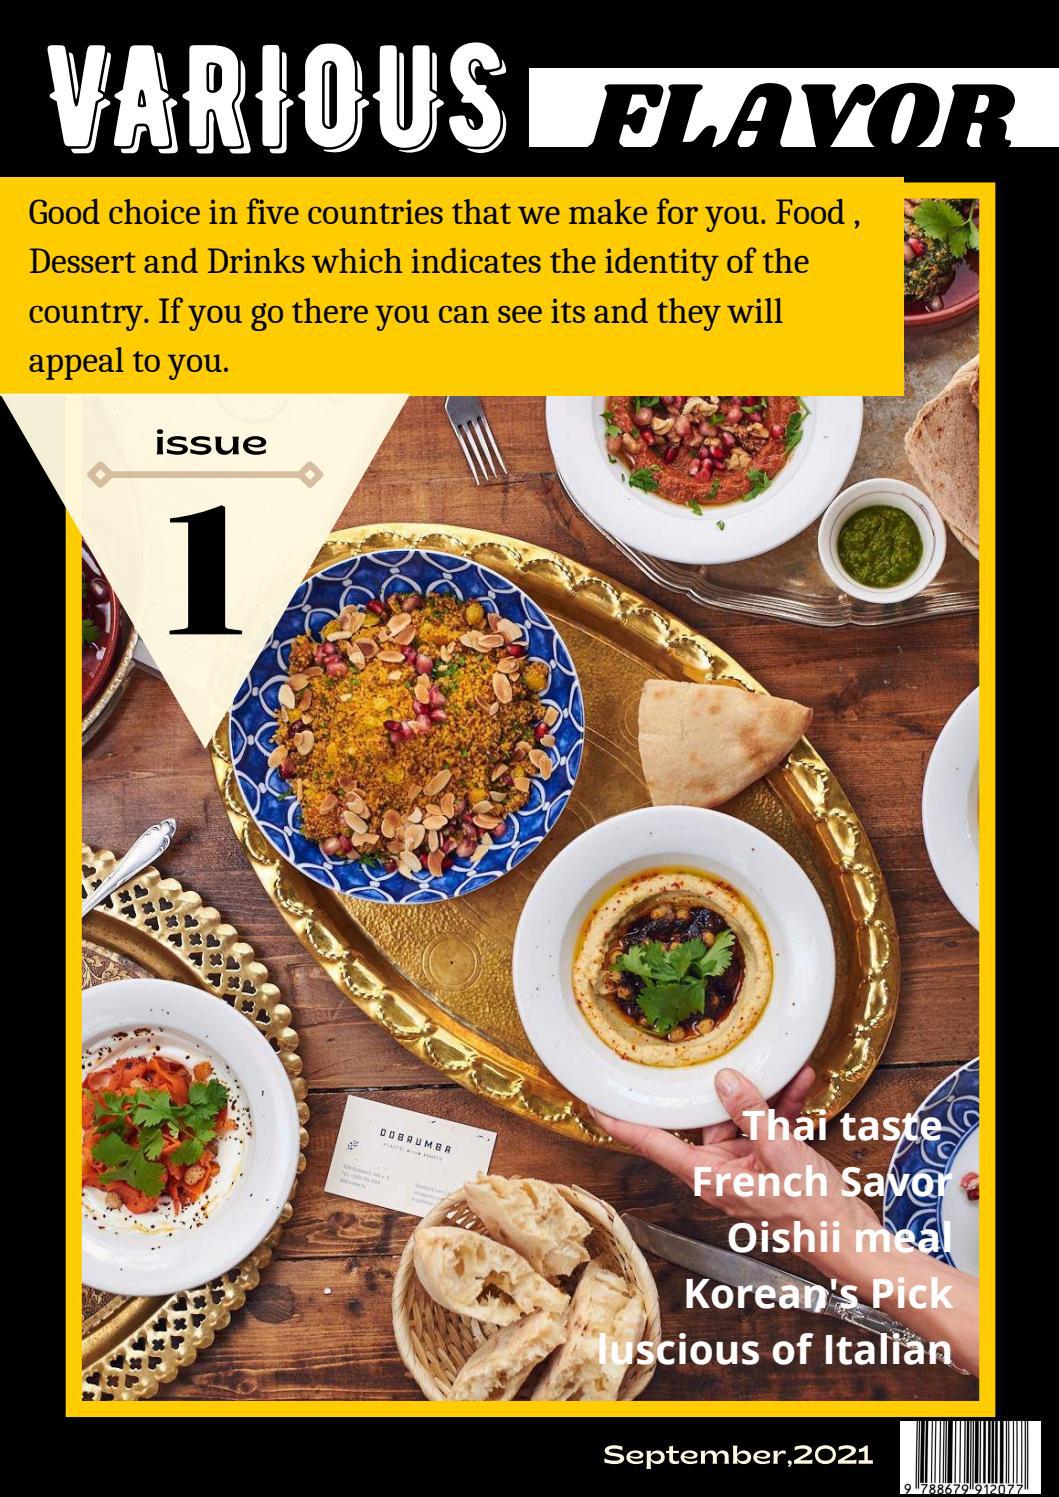 Various Flavour Magazine Issue 1, September 2021